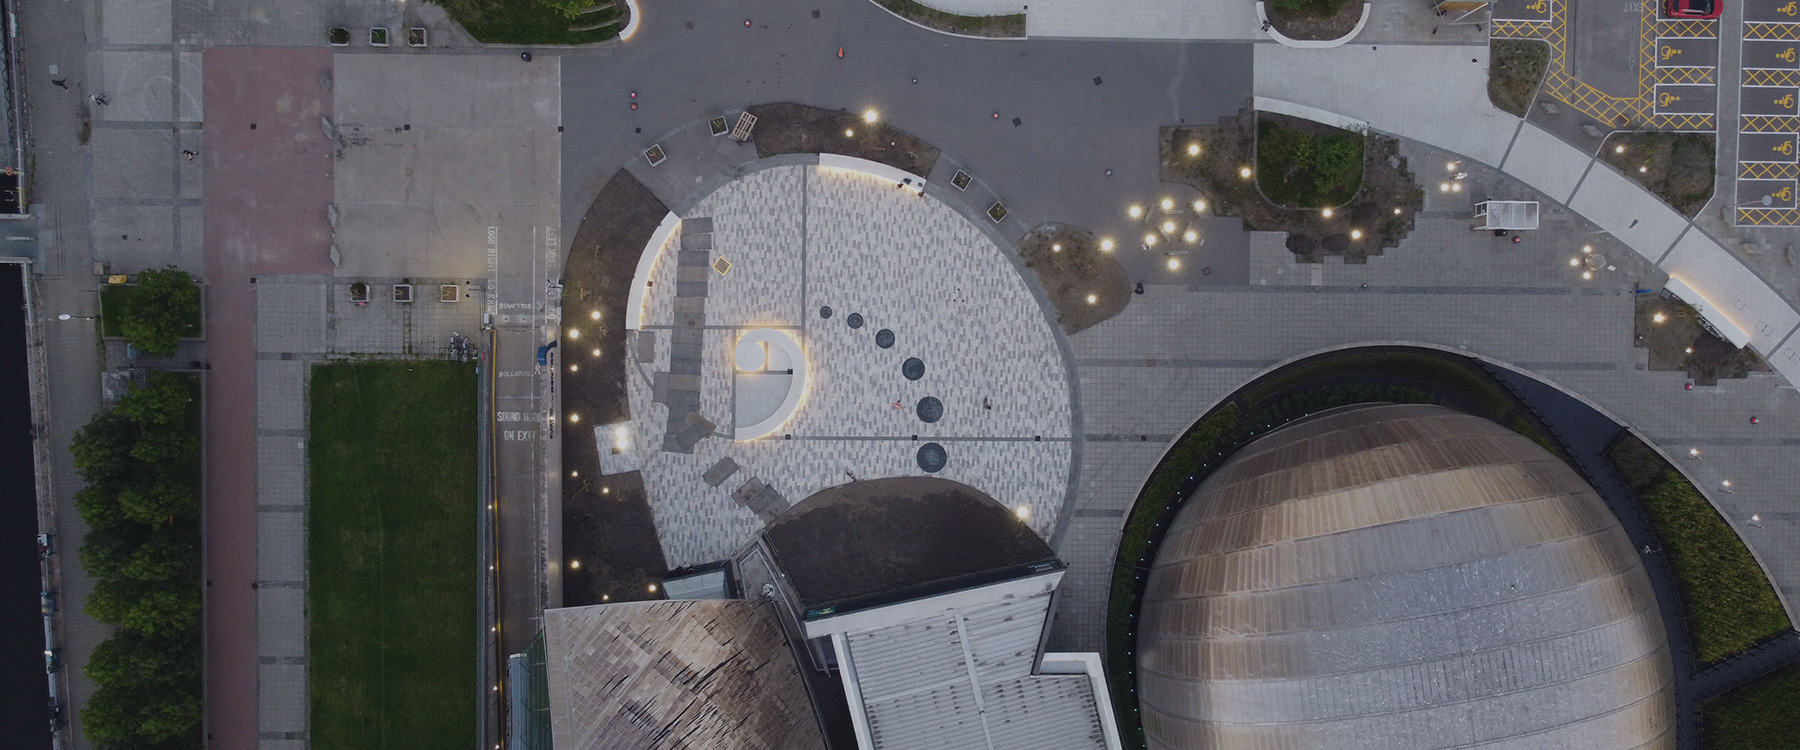 An aerial photo shows the spirals of the Fibonacci Garden at GSC. Image: HawkAye